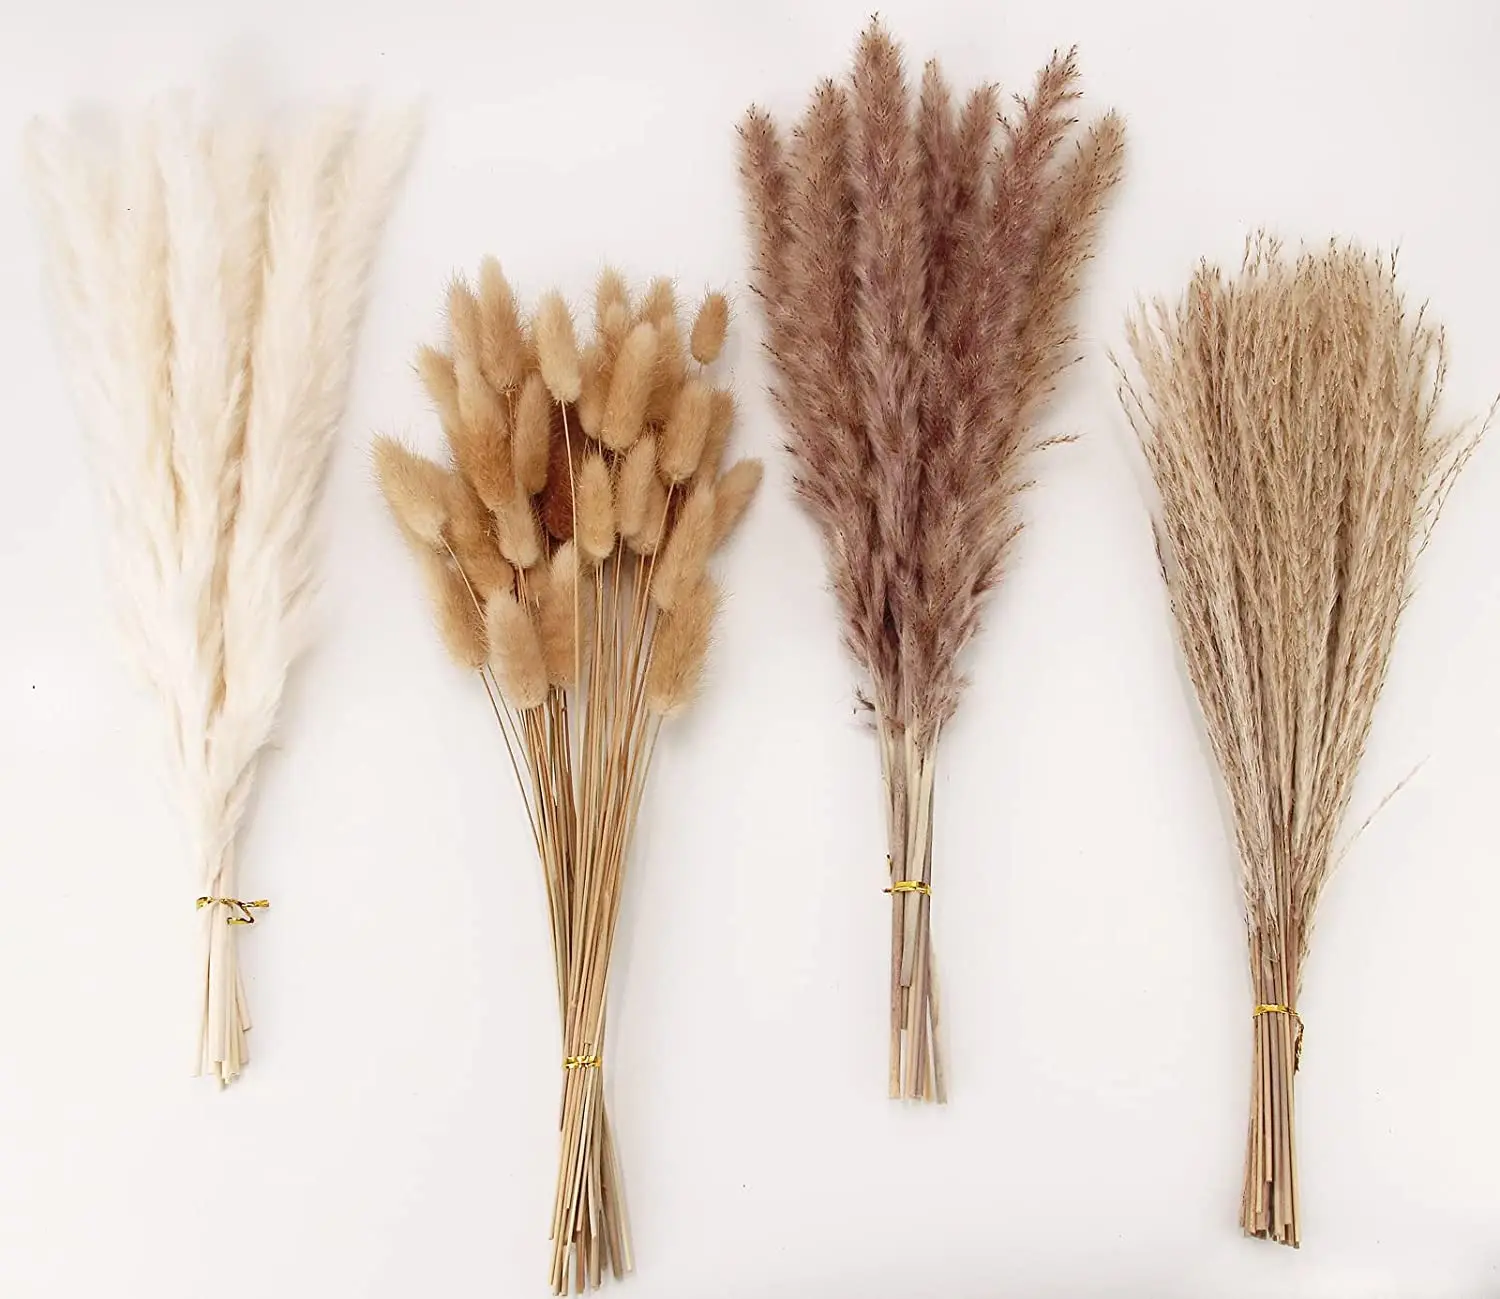 100 PCS Dried Pampas Grass ,Contains Bunny Tails Dried Flowers,Reed Grass Bouquet for Wedding Boho Flowers Home Table Decor